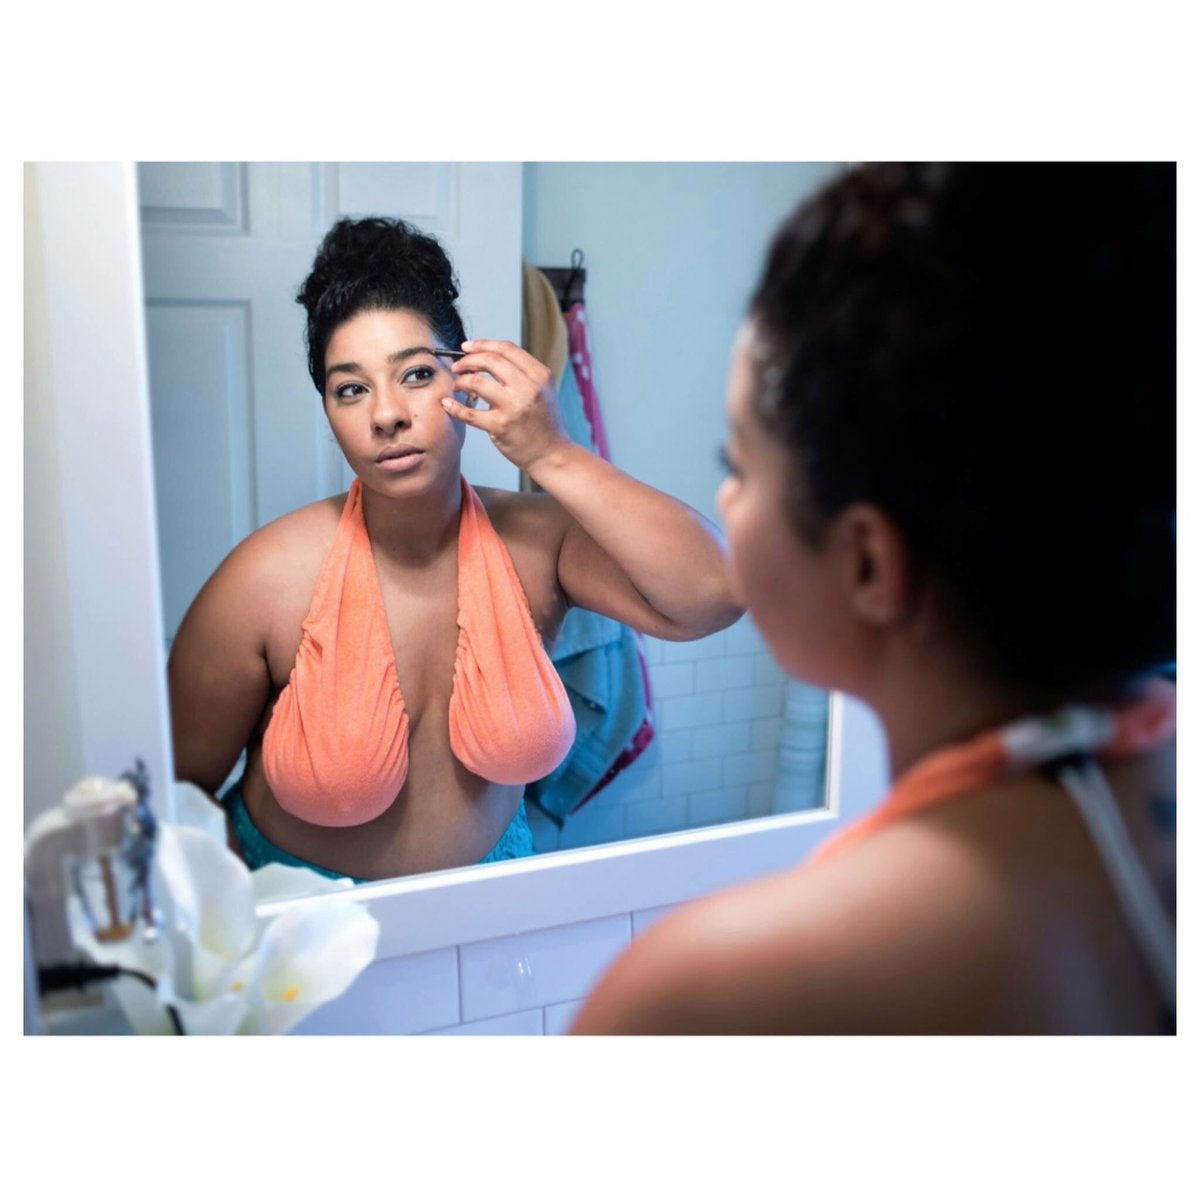 Ta-Ta-Towel: The breast accessory you didn't know you needed